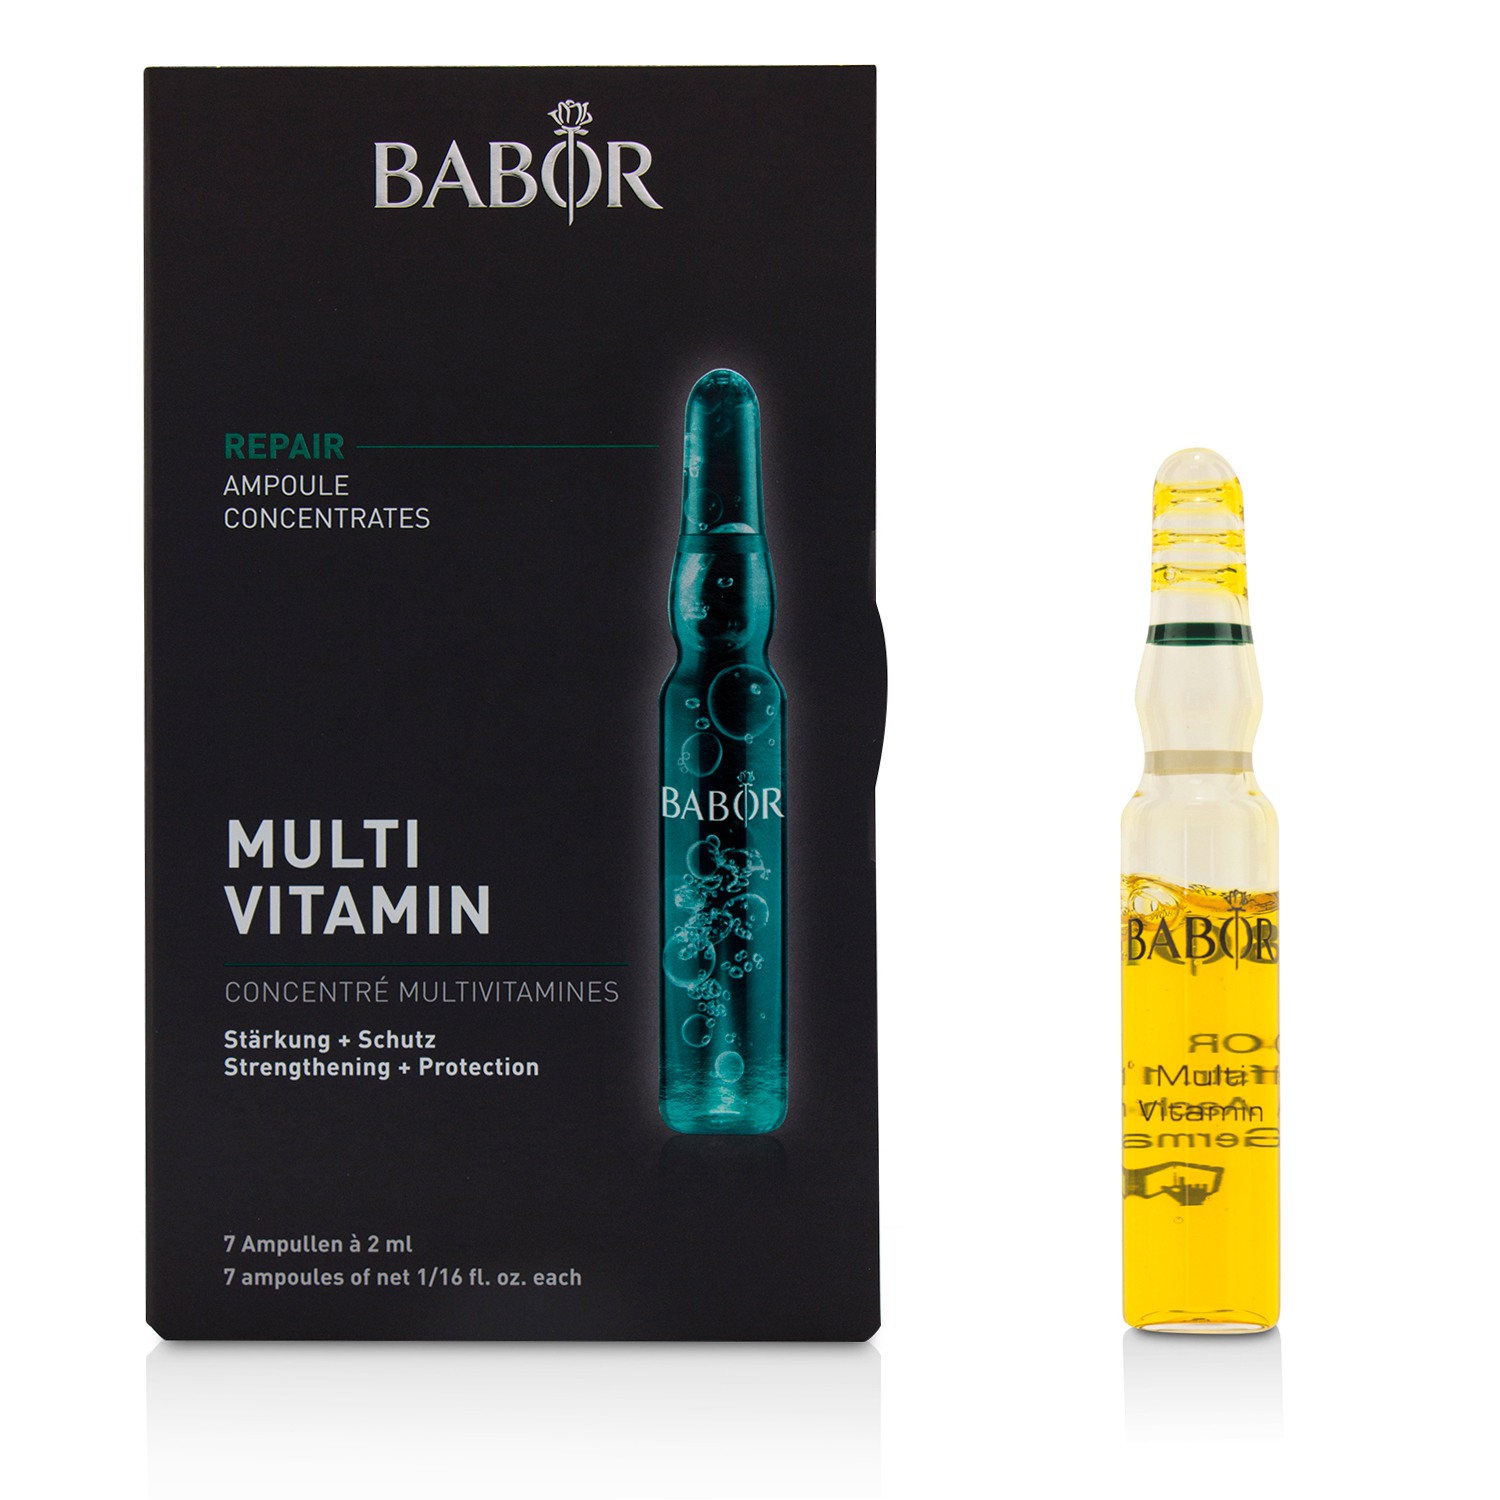 Ampoule Concentrates Repair Multi Vitamin (Strengthening + Protection) - For Very Dry Skin Babor Image